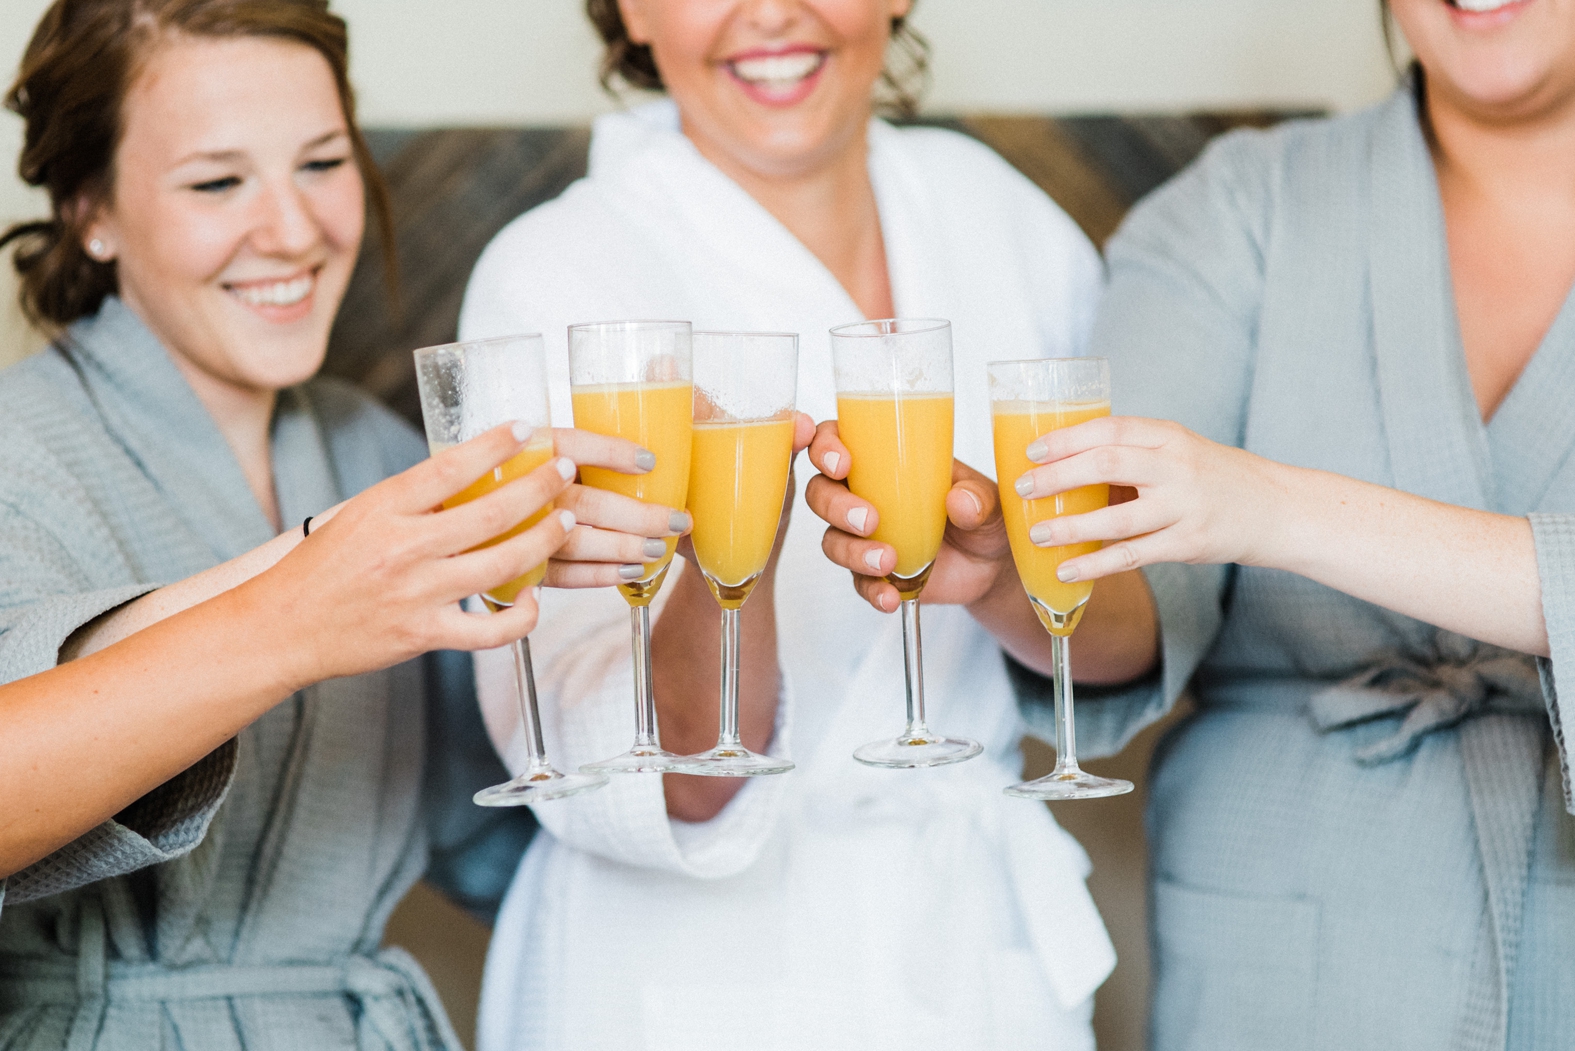 Bride and bridesmaids in monogrammed robes getting ready with mimosas; bridal party; cheers with mimosas